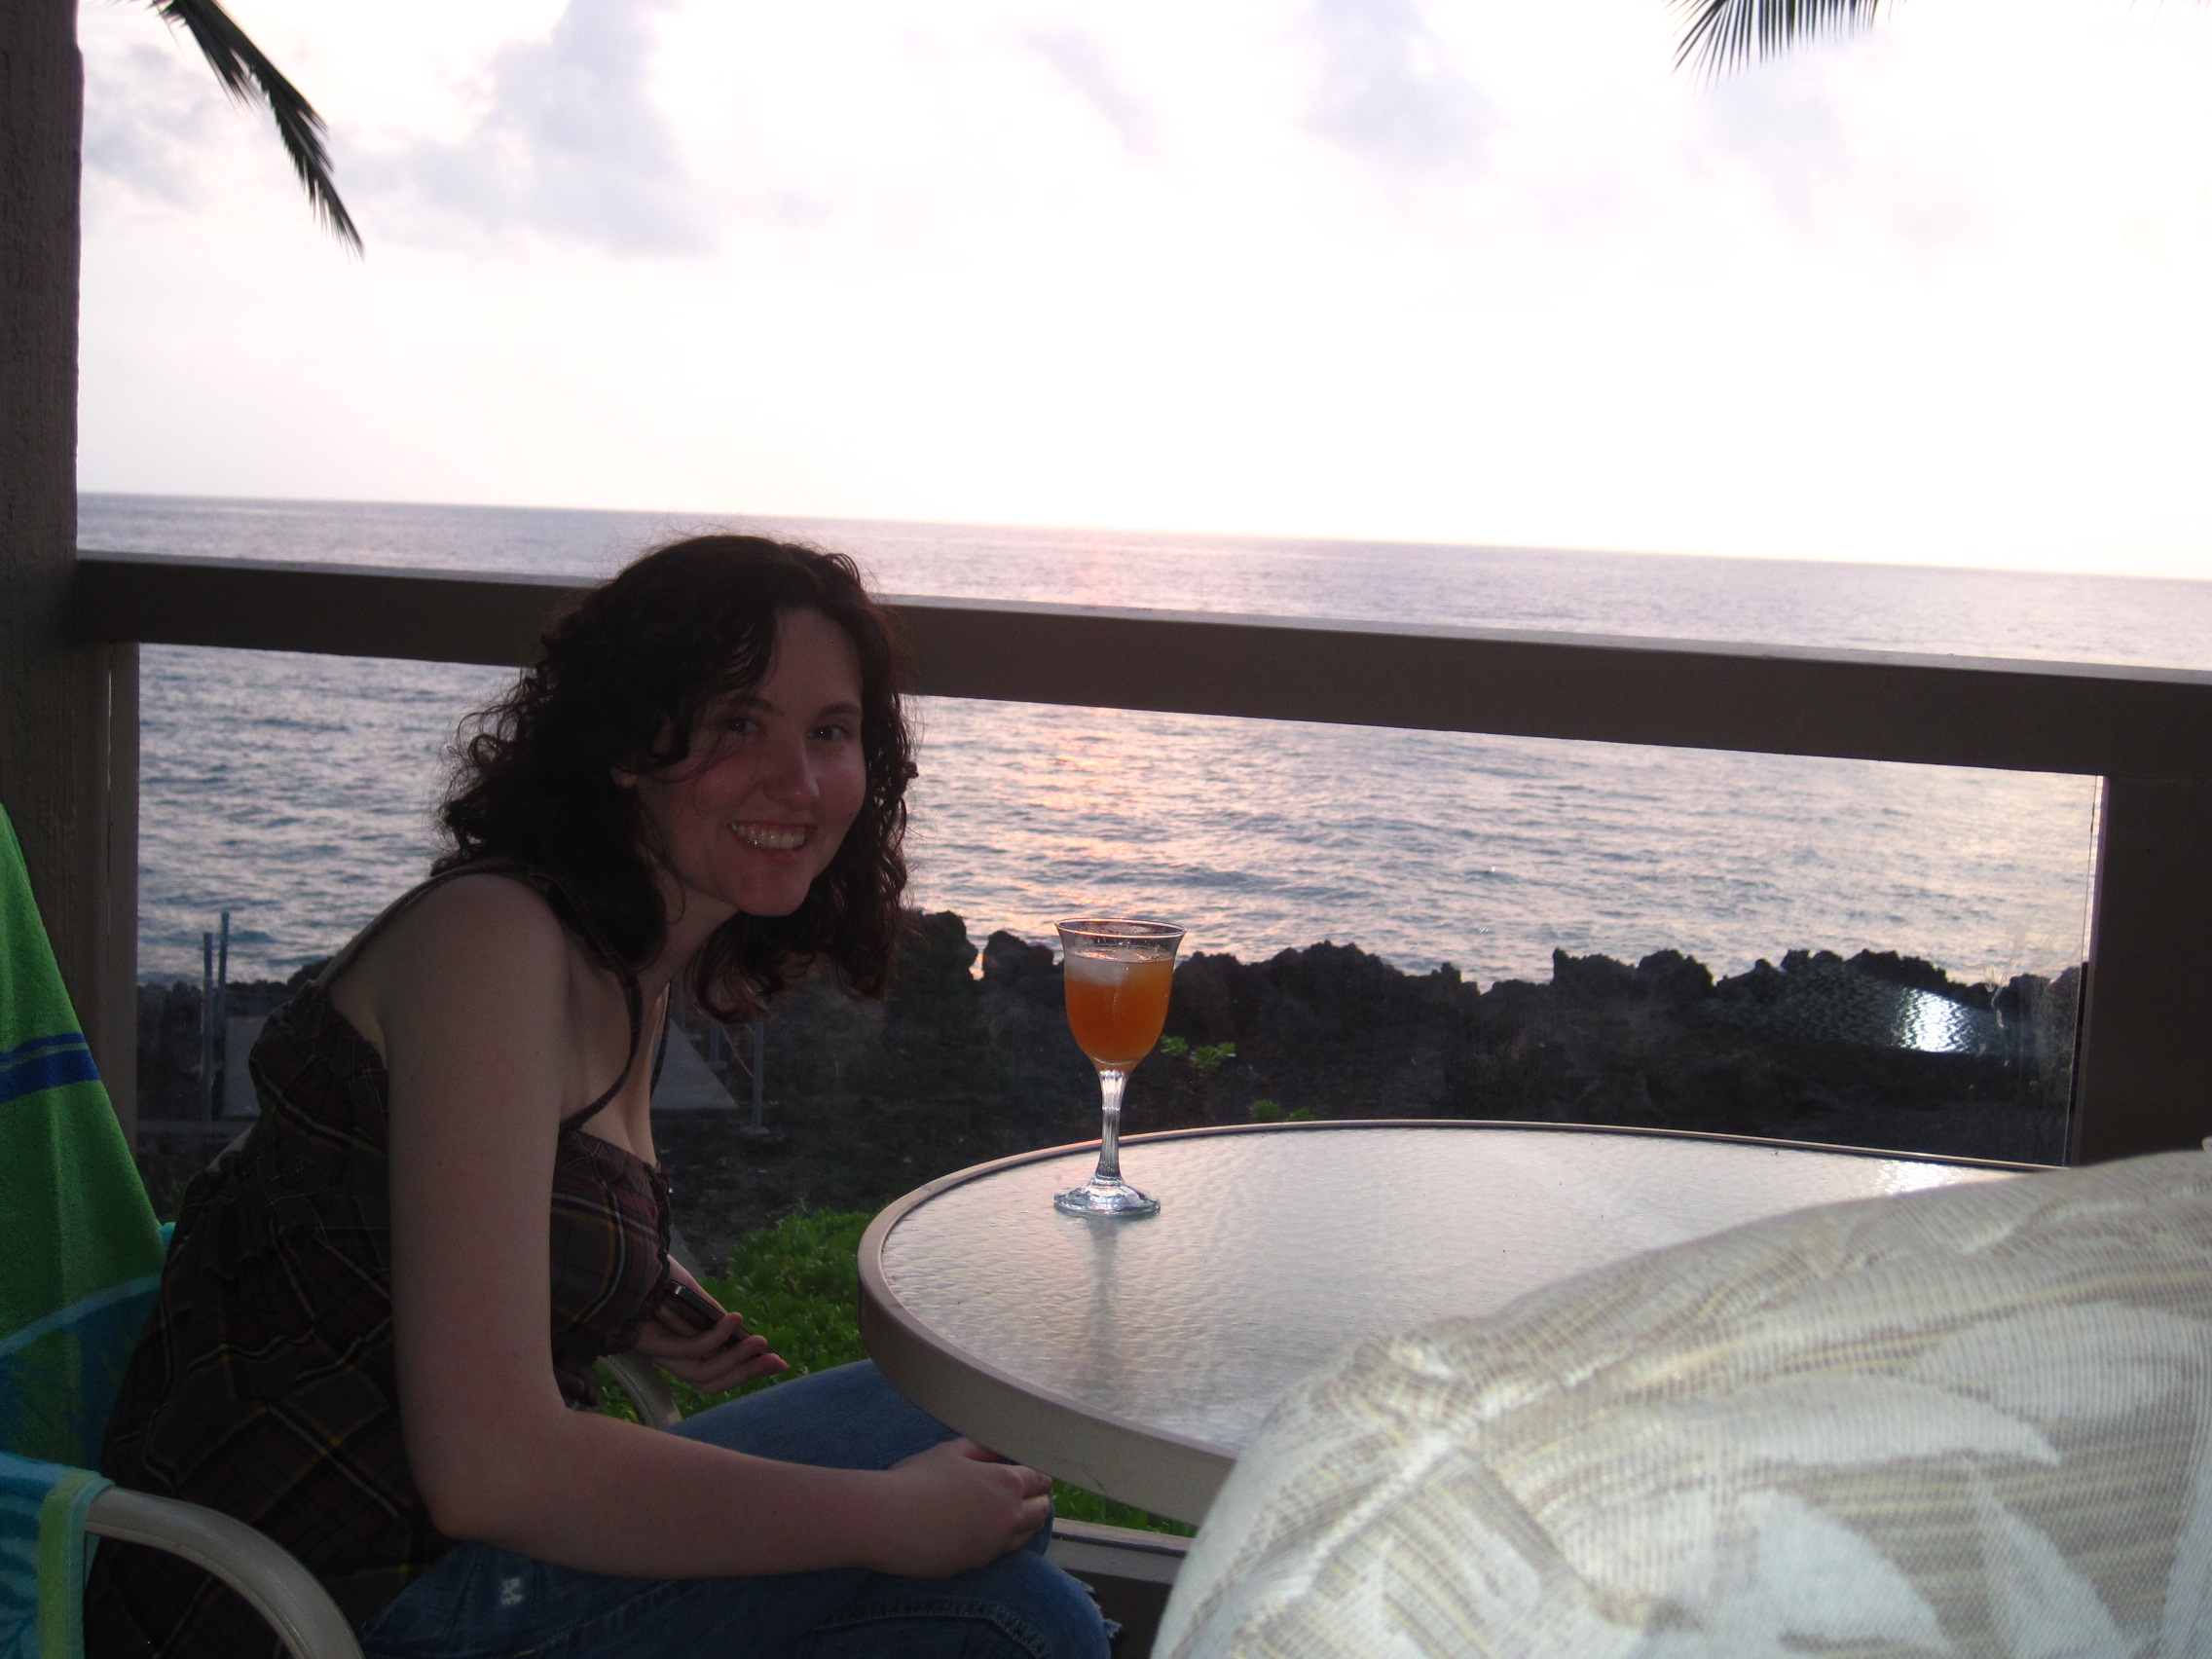 Mia Kalkhoff Xmxx - Kelly is enjoying some POG (Passion Orange Guava) and champage while  watching the sunset.